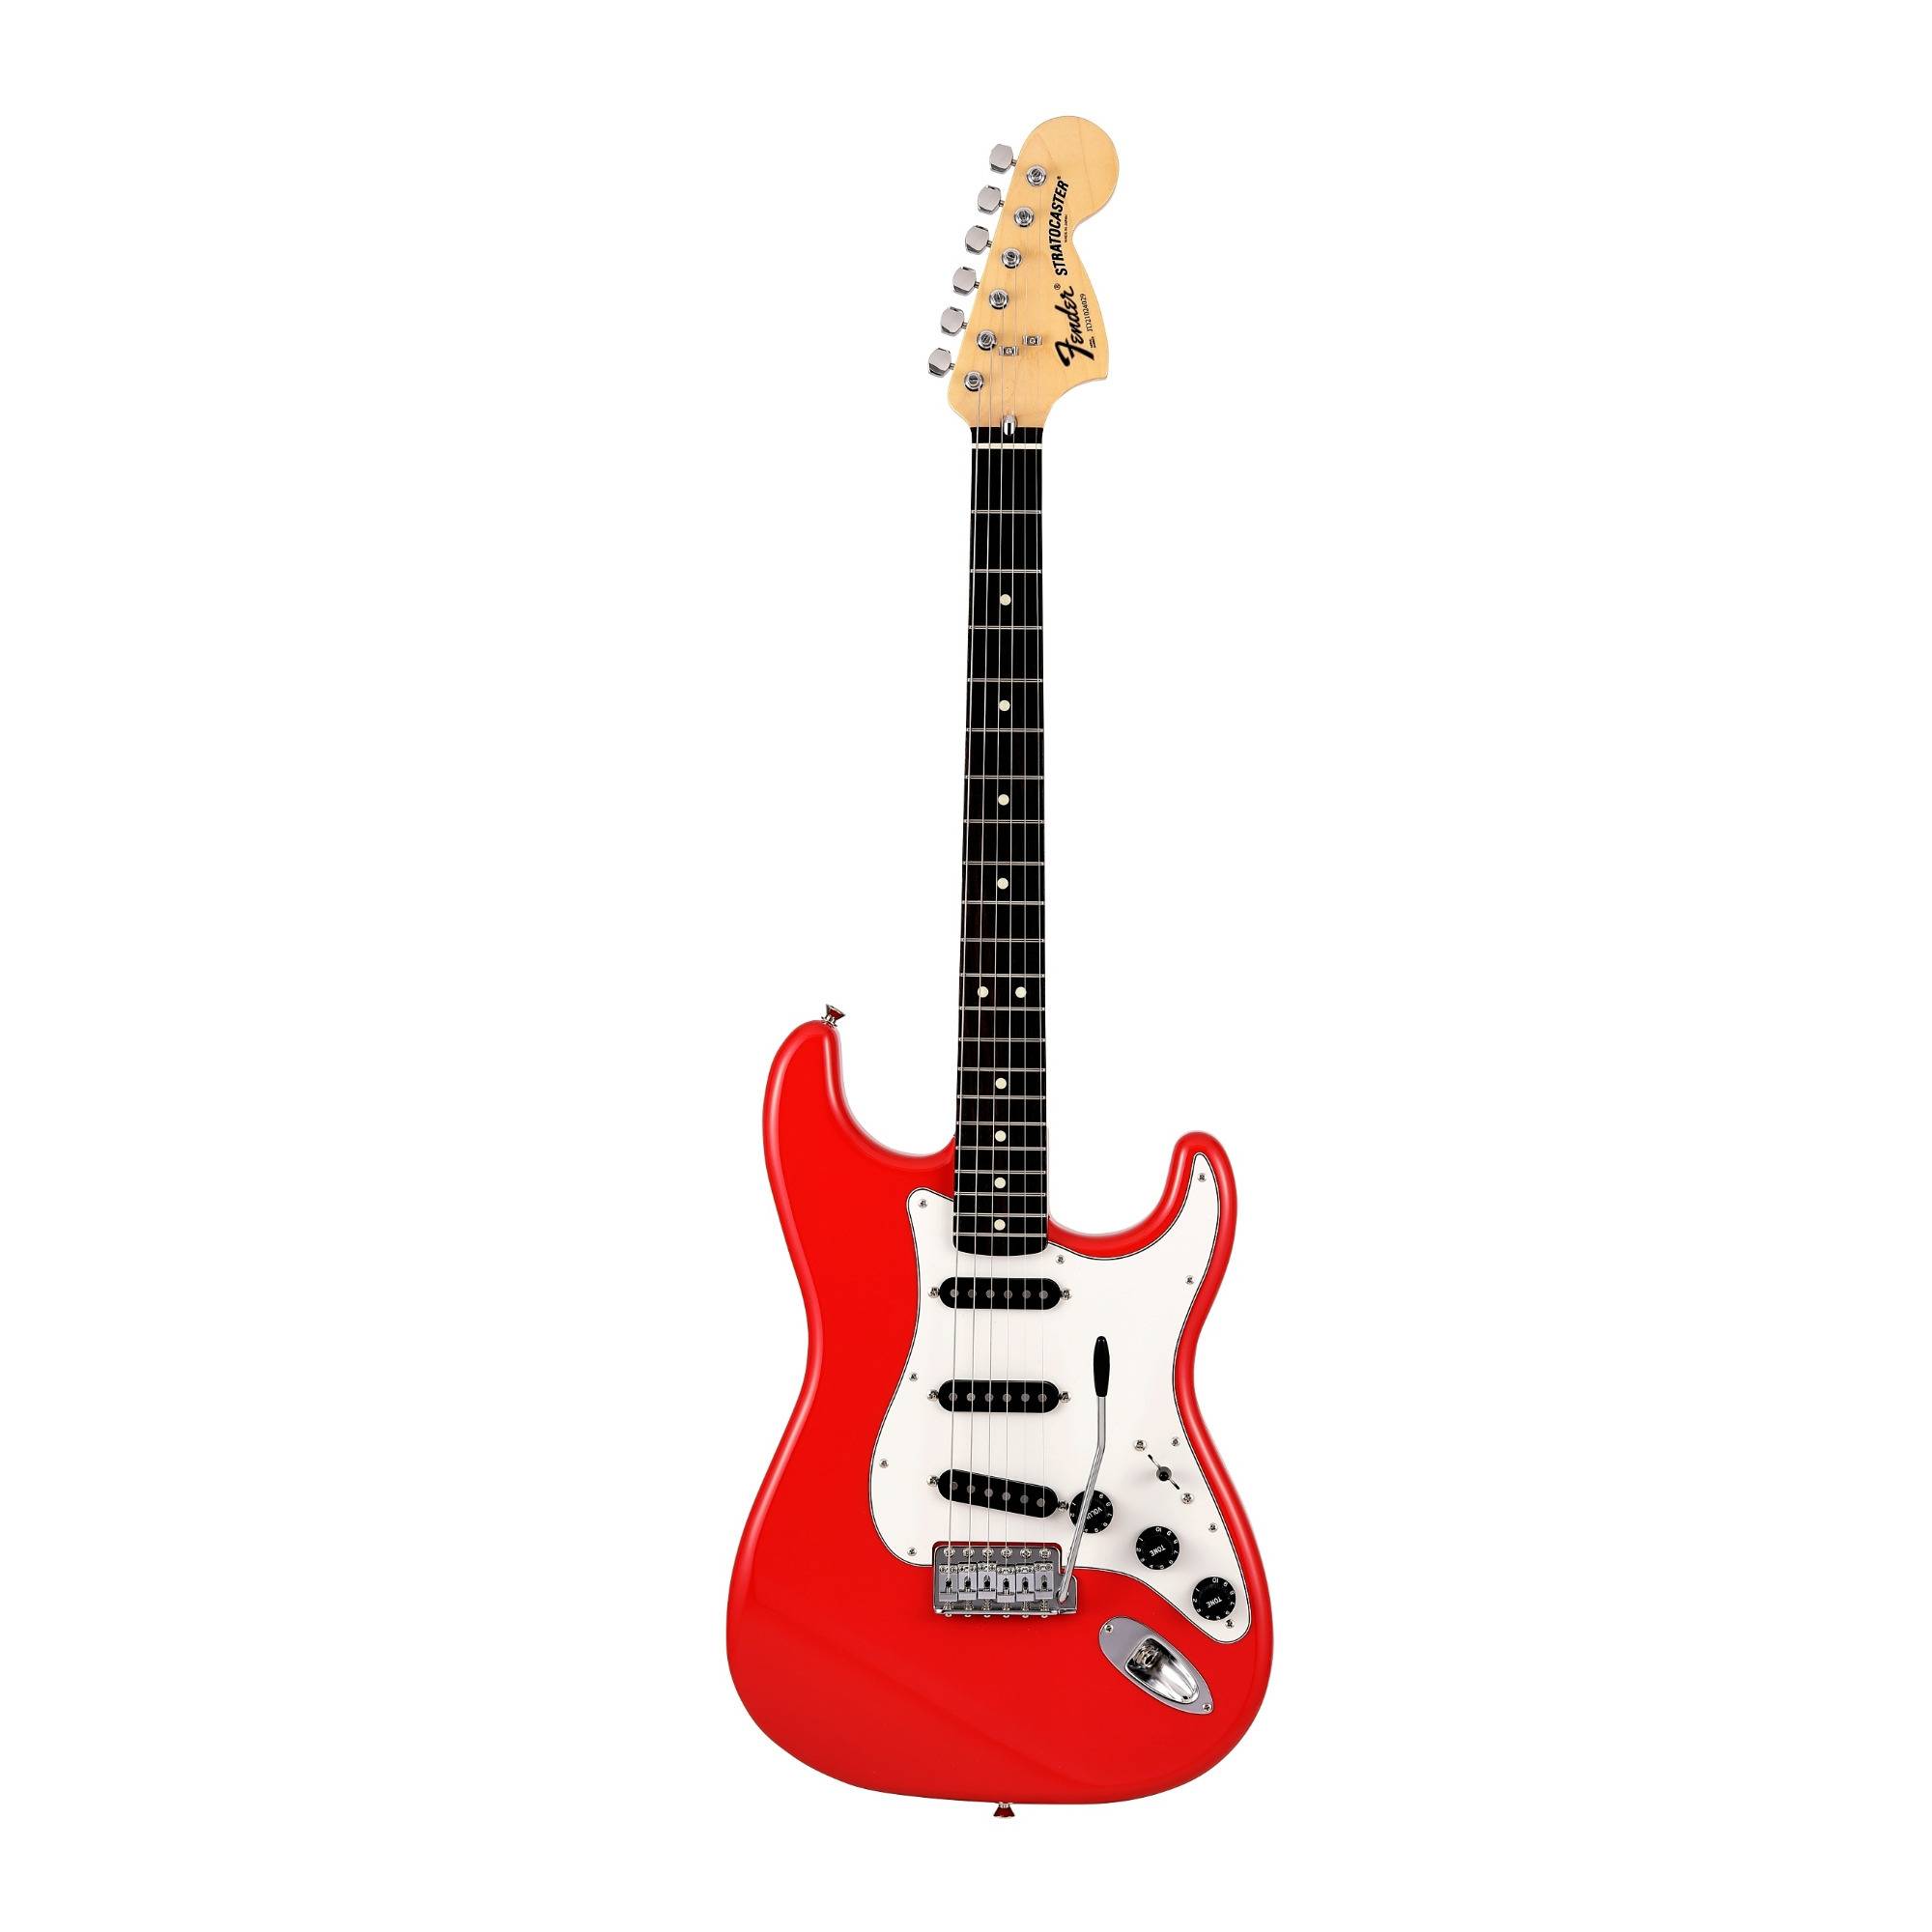 Fender Made in Japan Limited International Color Stratocaster Guitar with U Neck (Morocco Red)